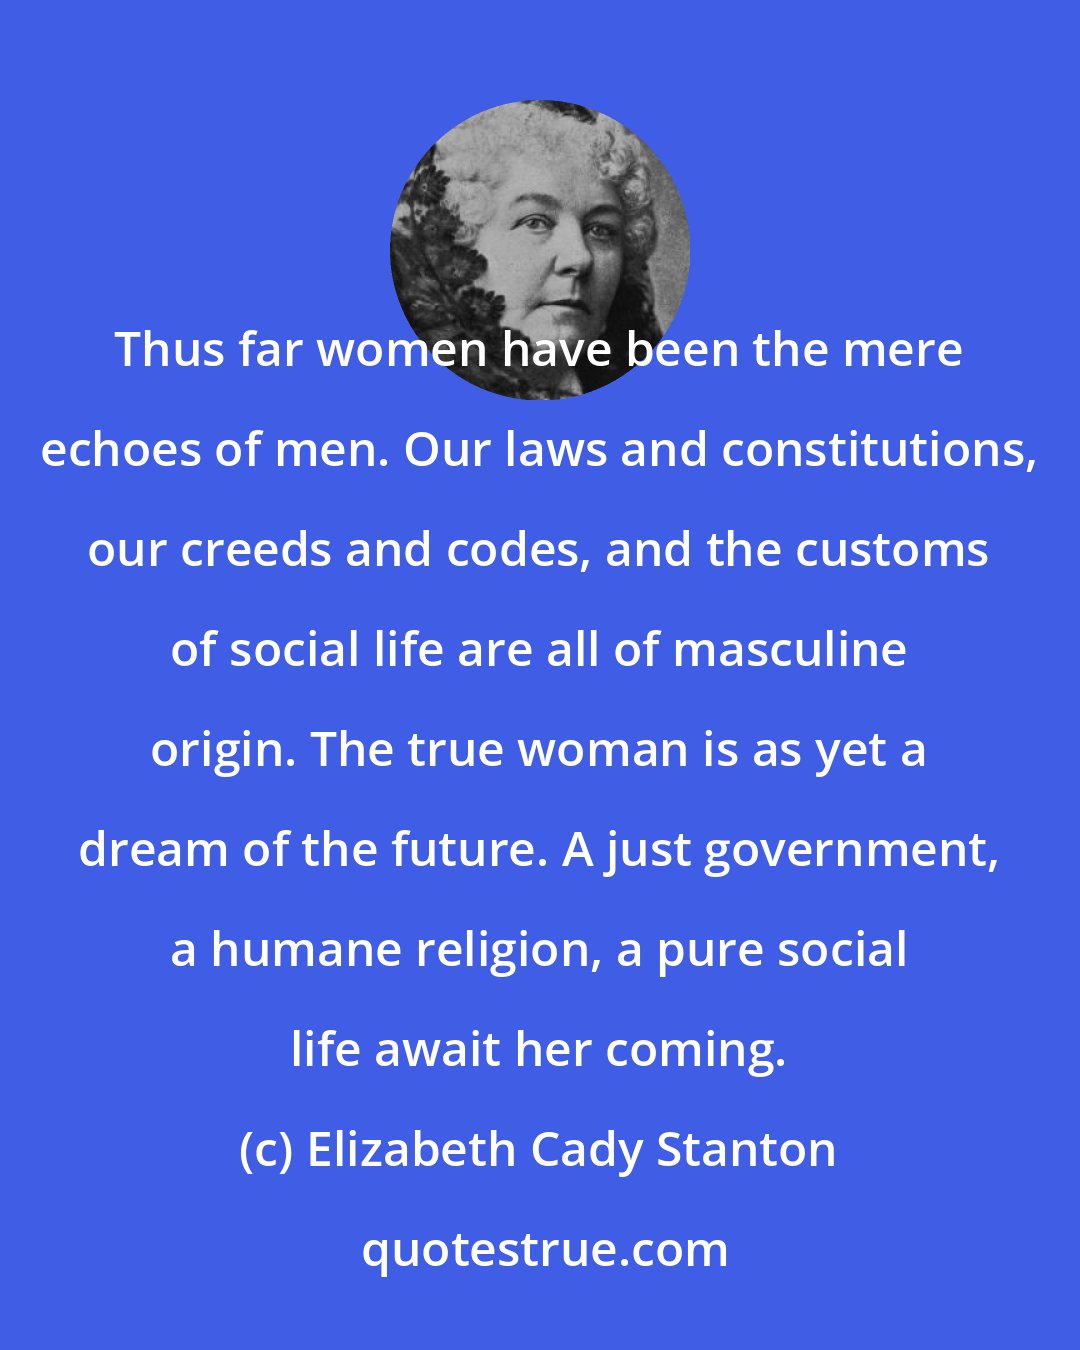 Elizabeth Cady Stanton: Thus far women have been the mere echoes of men. Our laws and constitutions, our creeds and codes, and the customs of social life are all of masculine origin. The true woman is as yet a dream of the future. A just government, a humane religion, a pure social life await her coming.